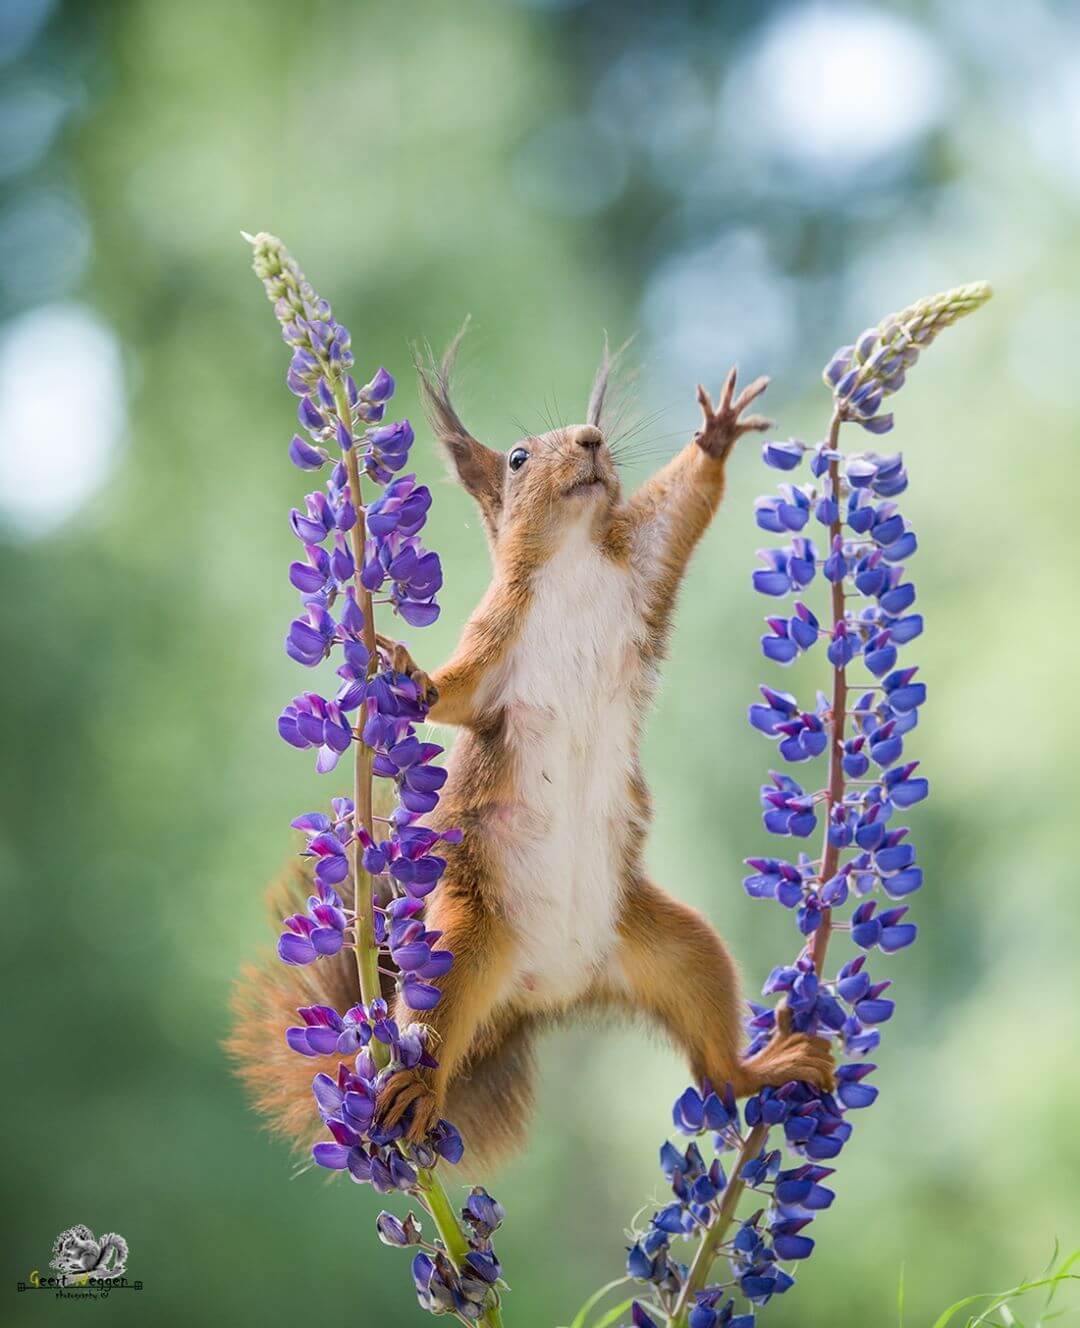 Photographer Captures Charming, Extraordinary Pictures of Wild Squirrels Being Very Curious